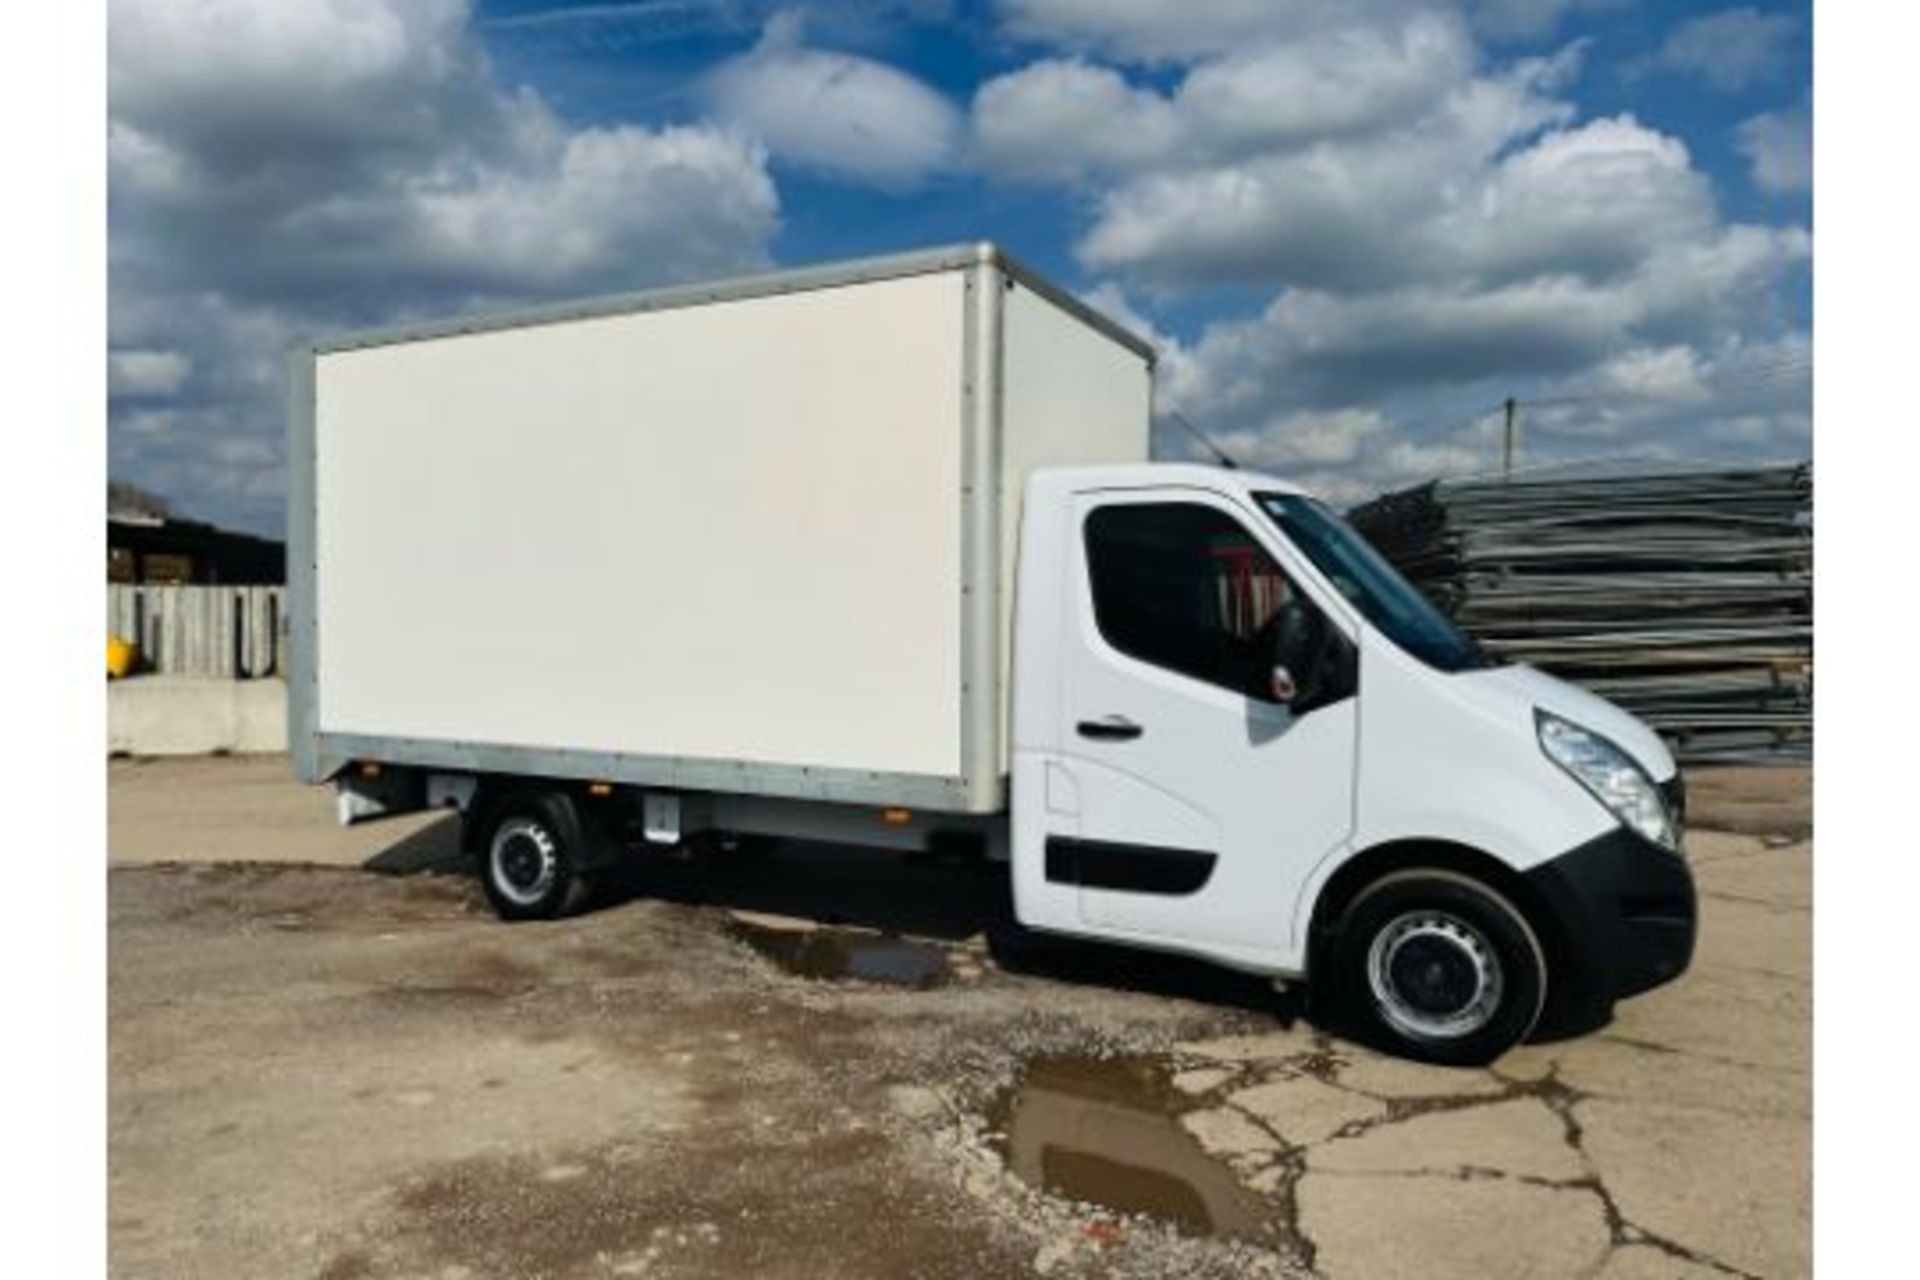 Reserve Met -RENAULT MASTER 2.3DCI (130) Business Edition Lwb Box Van With Electric Tail Lift 68 Reg - Image 6 of 27